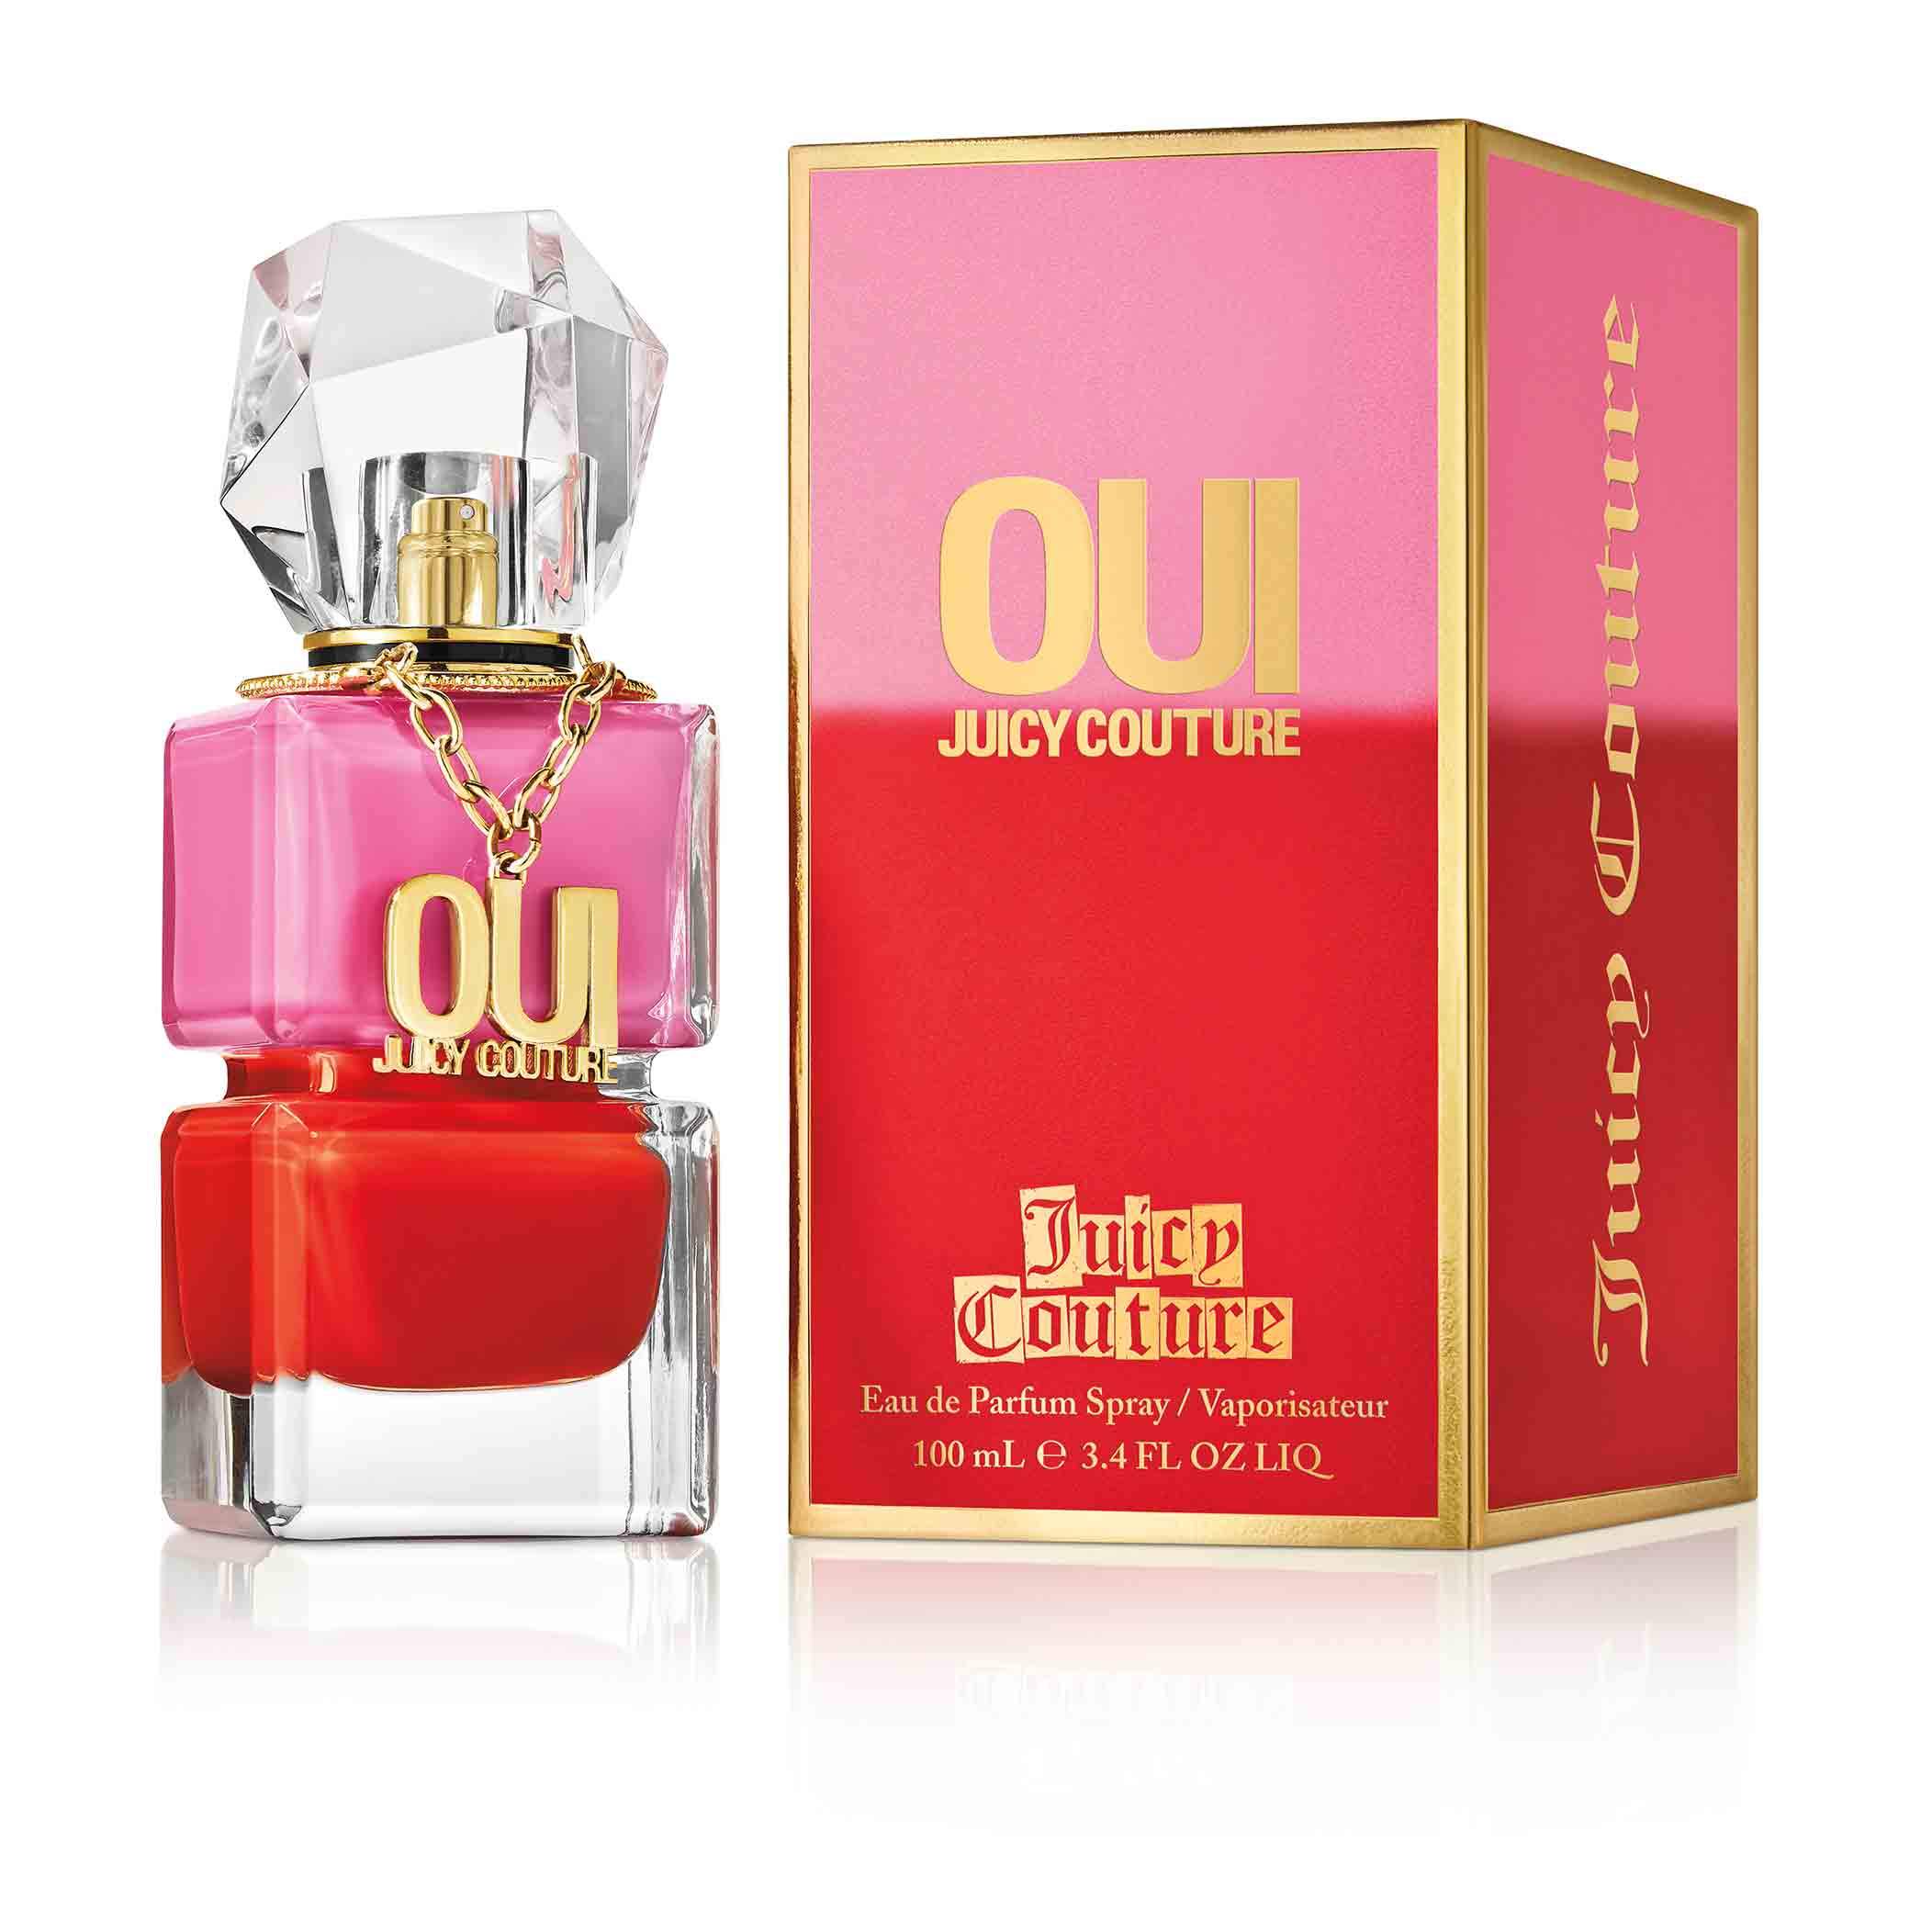 Say Oui to Juicy Couture's new designer perfume that demands the occasion of making a statement. This vibrantly rich women's perfume will have you saying Oui! to a burst of nostalgic pops providing mouthwatering freshness. Whether you're looking for your new signature scent or the perfect gift, Oui Juicy Couture will captivate and fascinate with its exclusive fragrance.